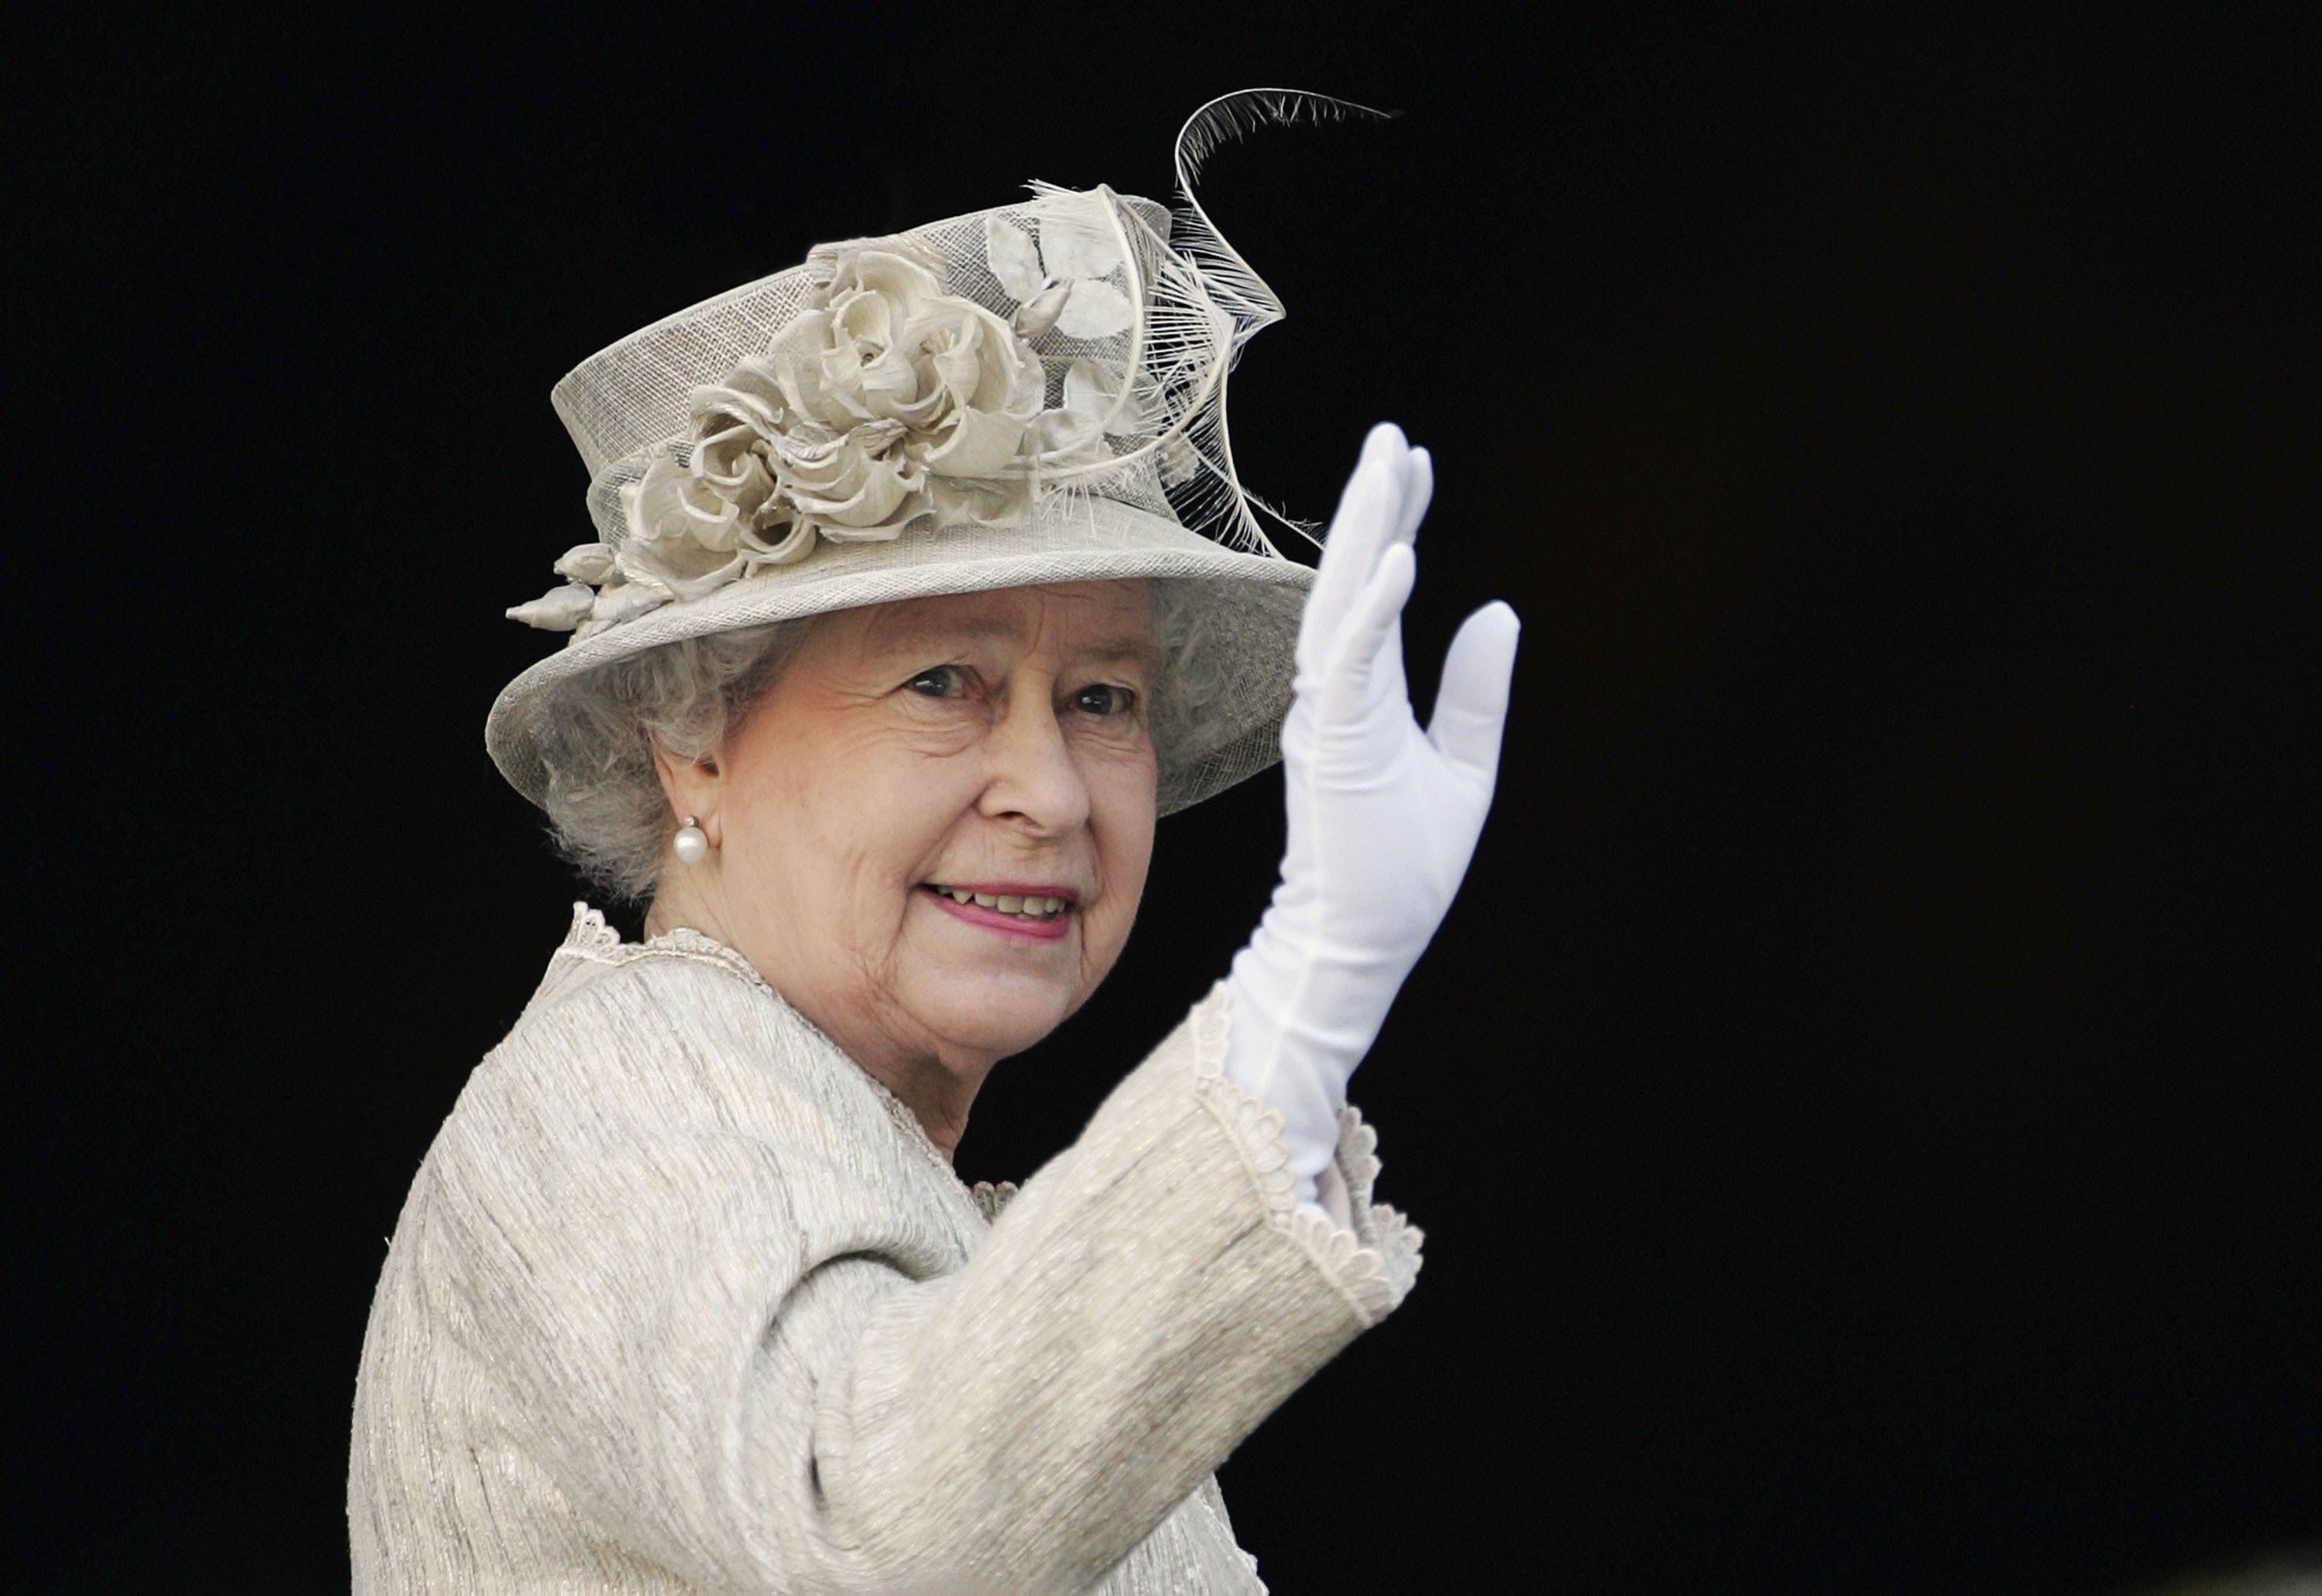 Forced Porn Videos Of Queens - Opinion: The one word that defined Elizabeth II | CNN